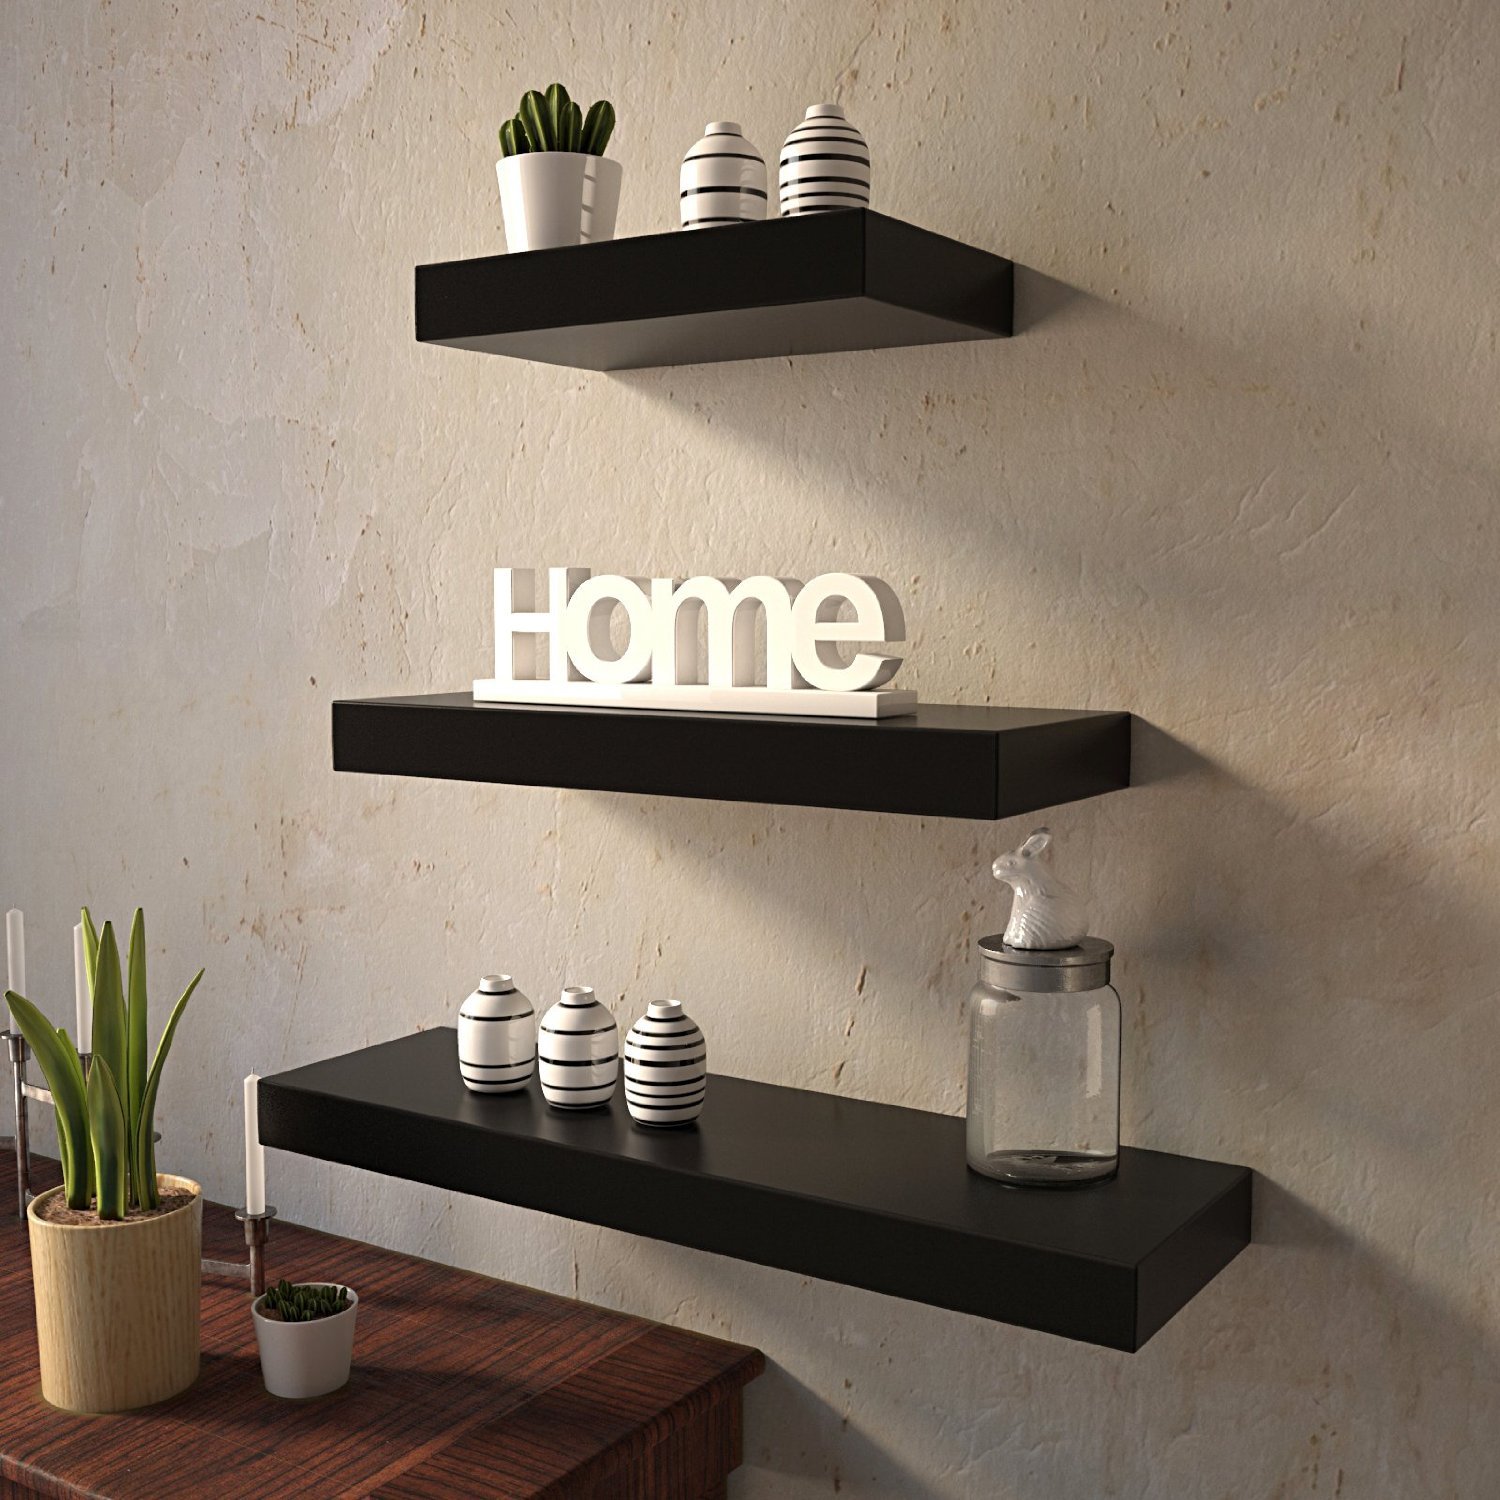 Set Of 3 (24x7IN 18x7IN 12x7IN) Floating Wall Shelves for Storage & Display – Black